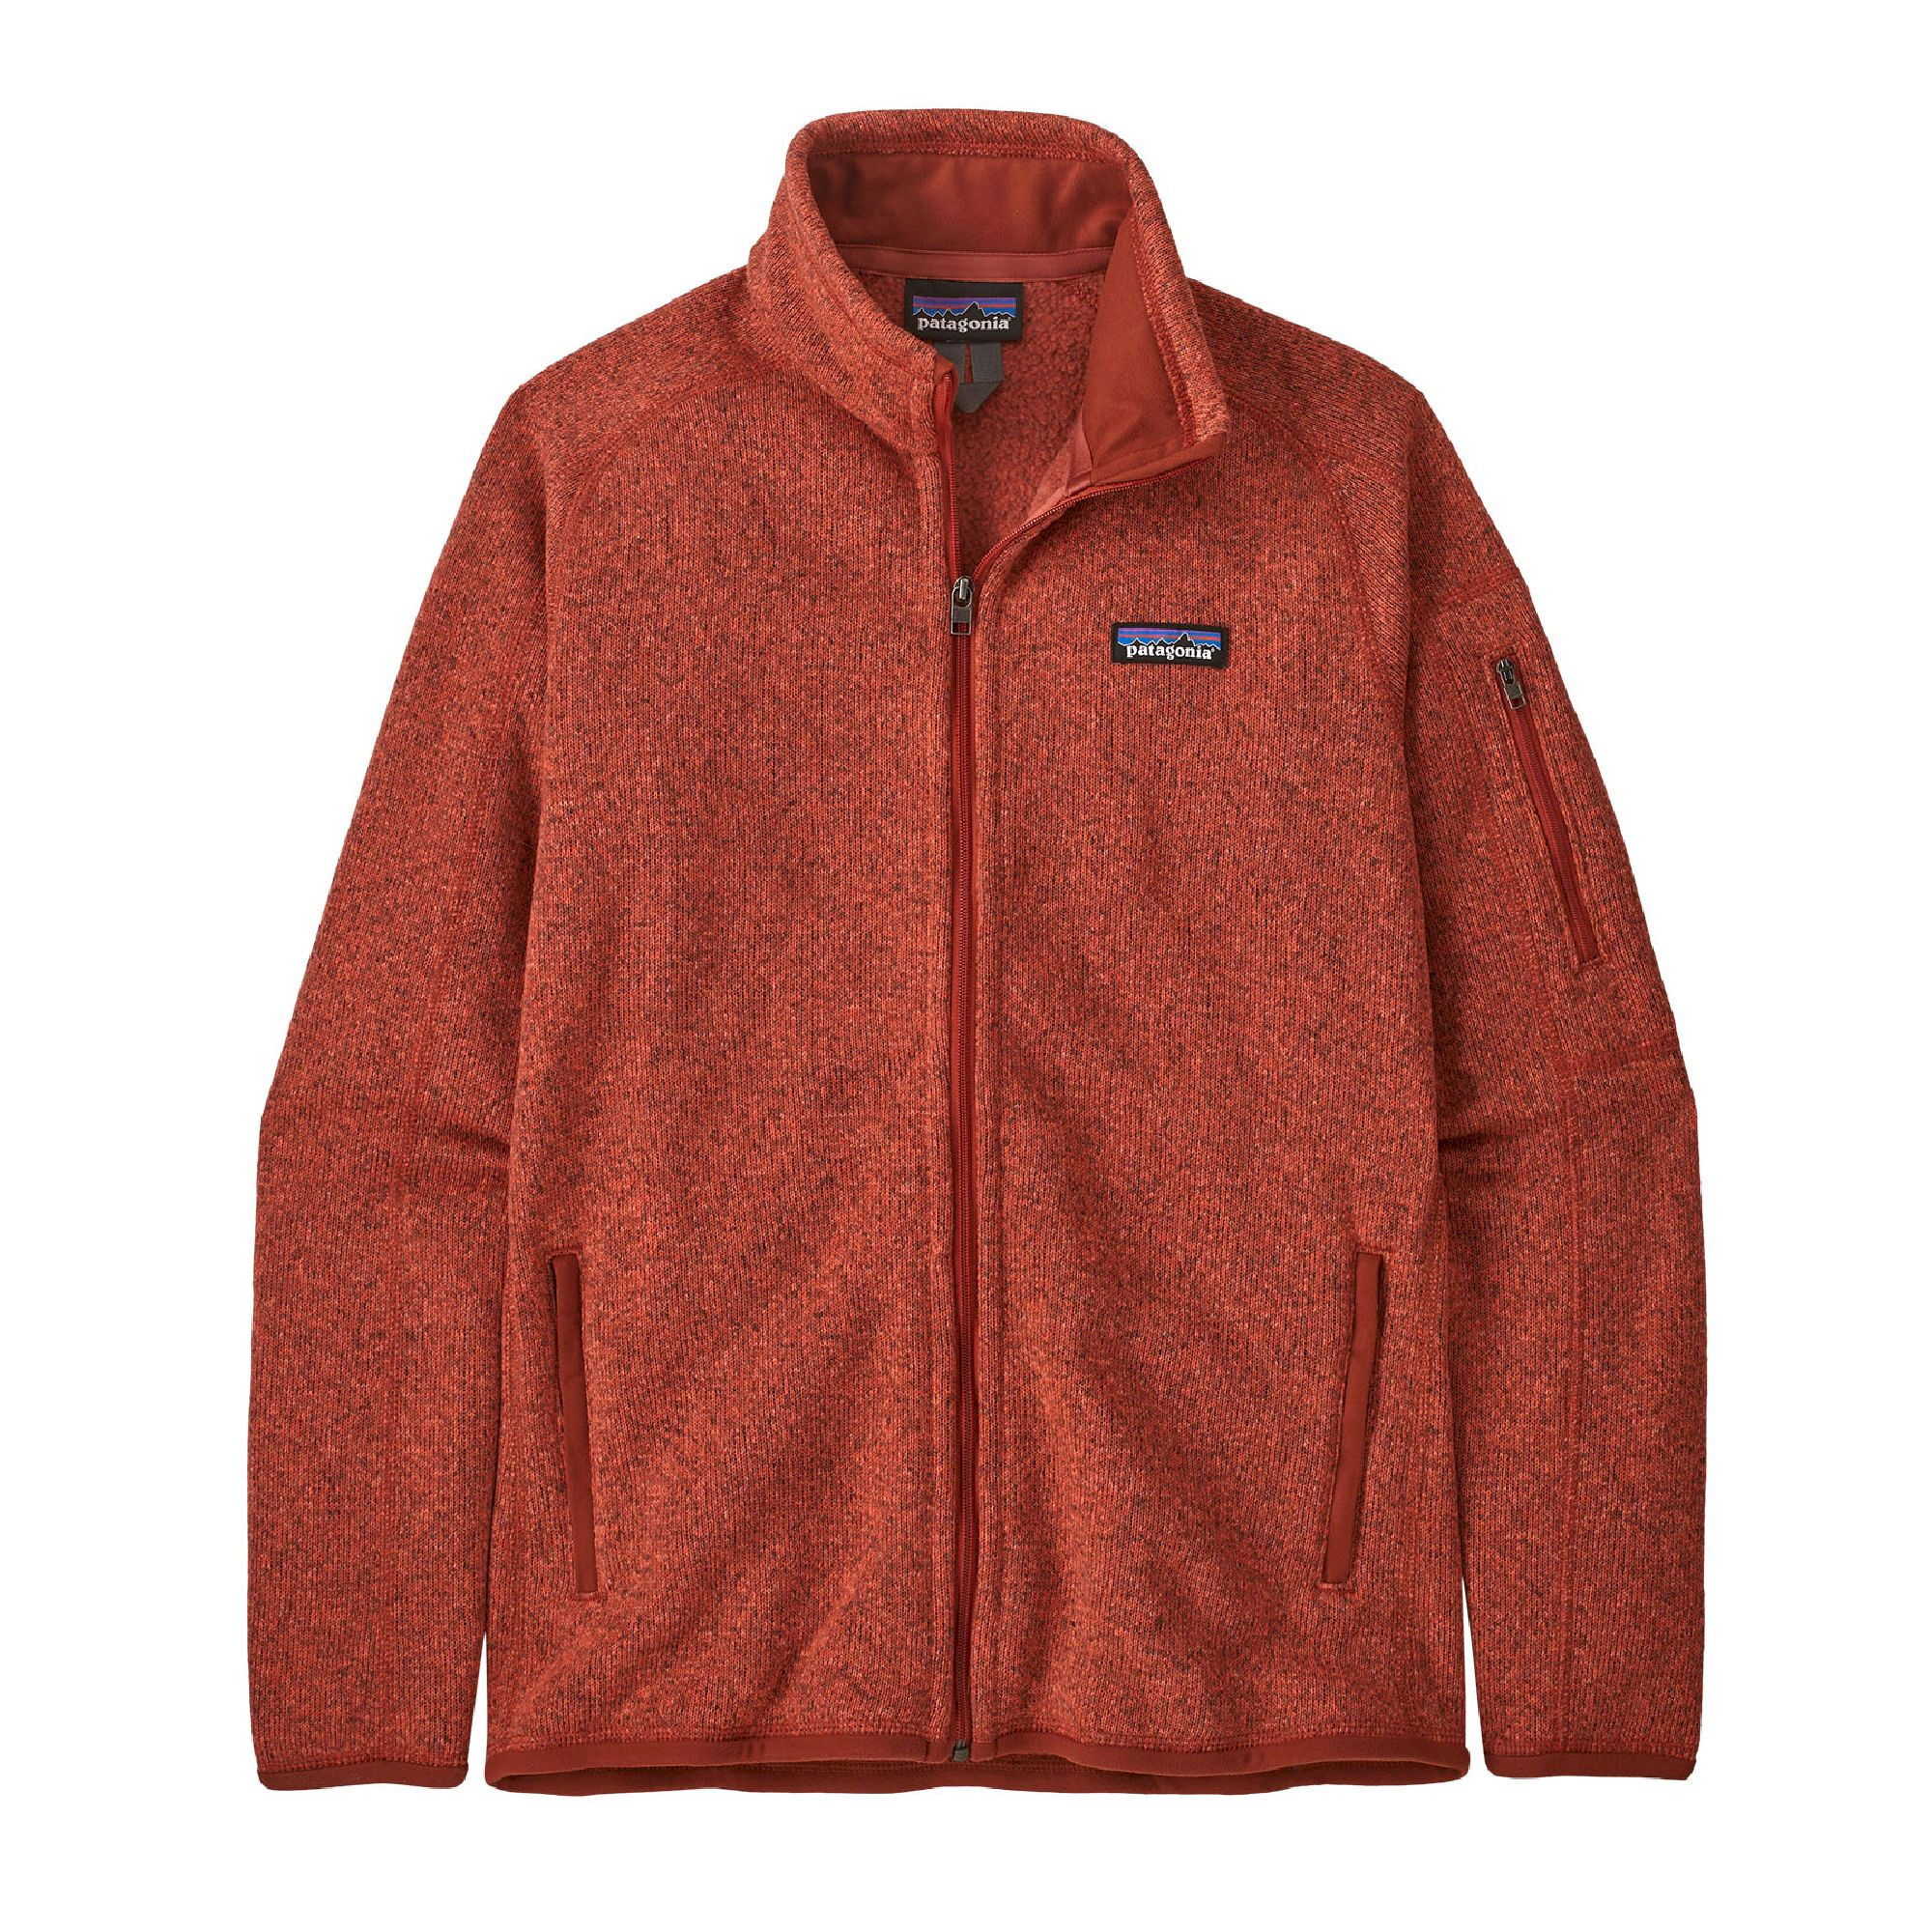 Patagonia Better Sweater Jkt - Polaire femme | Hardloop